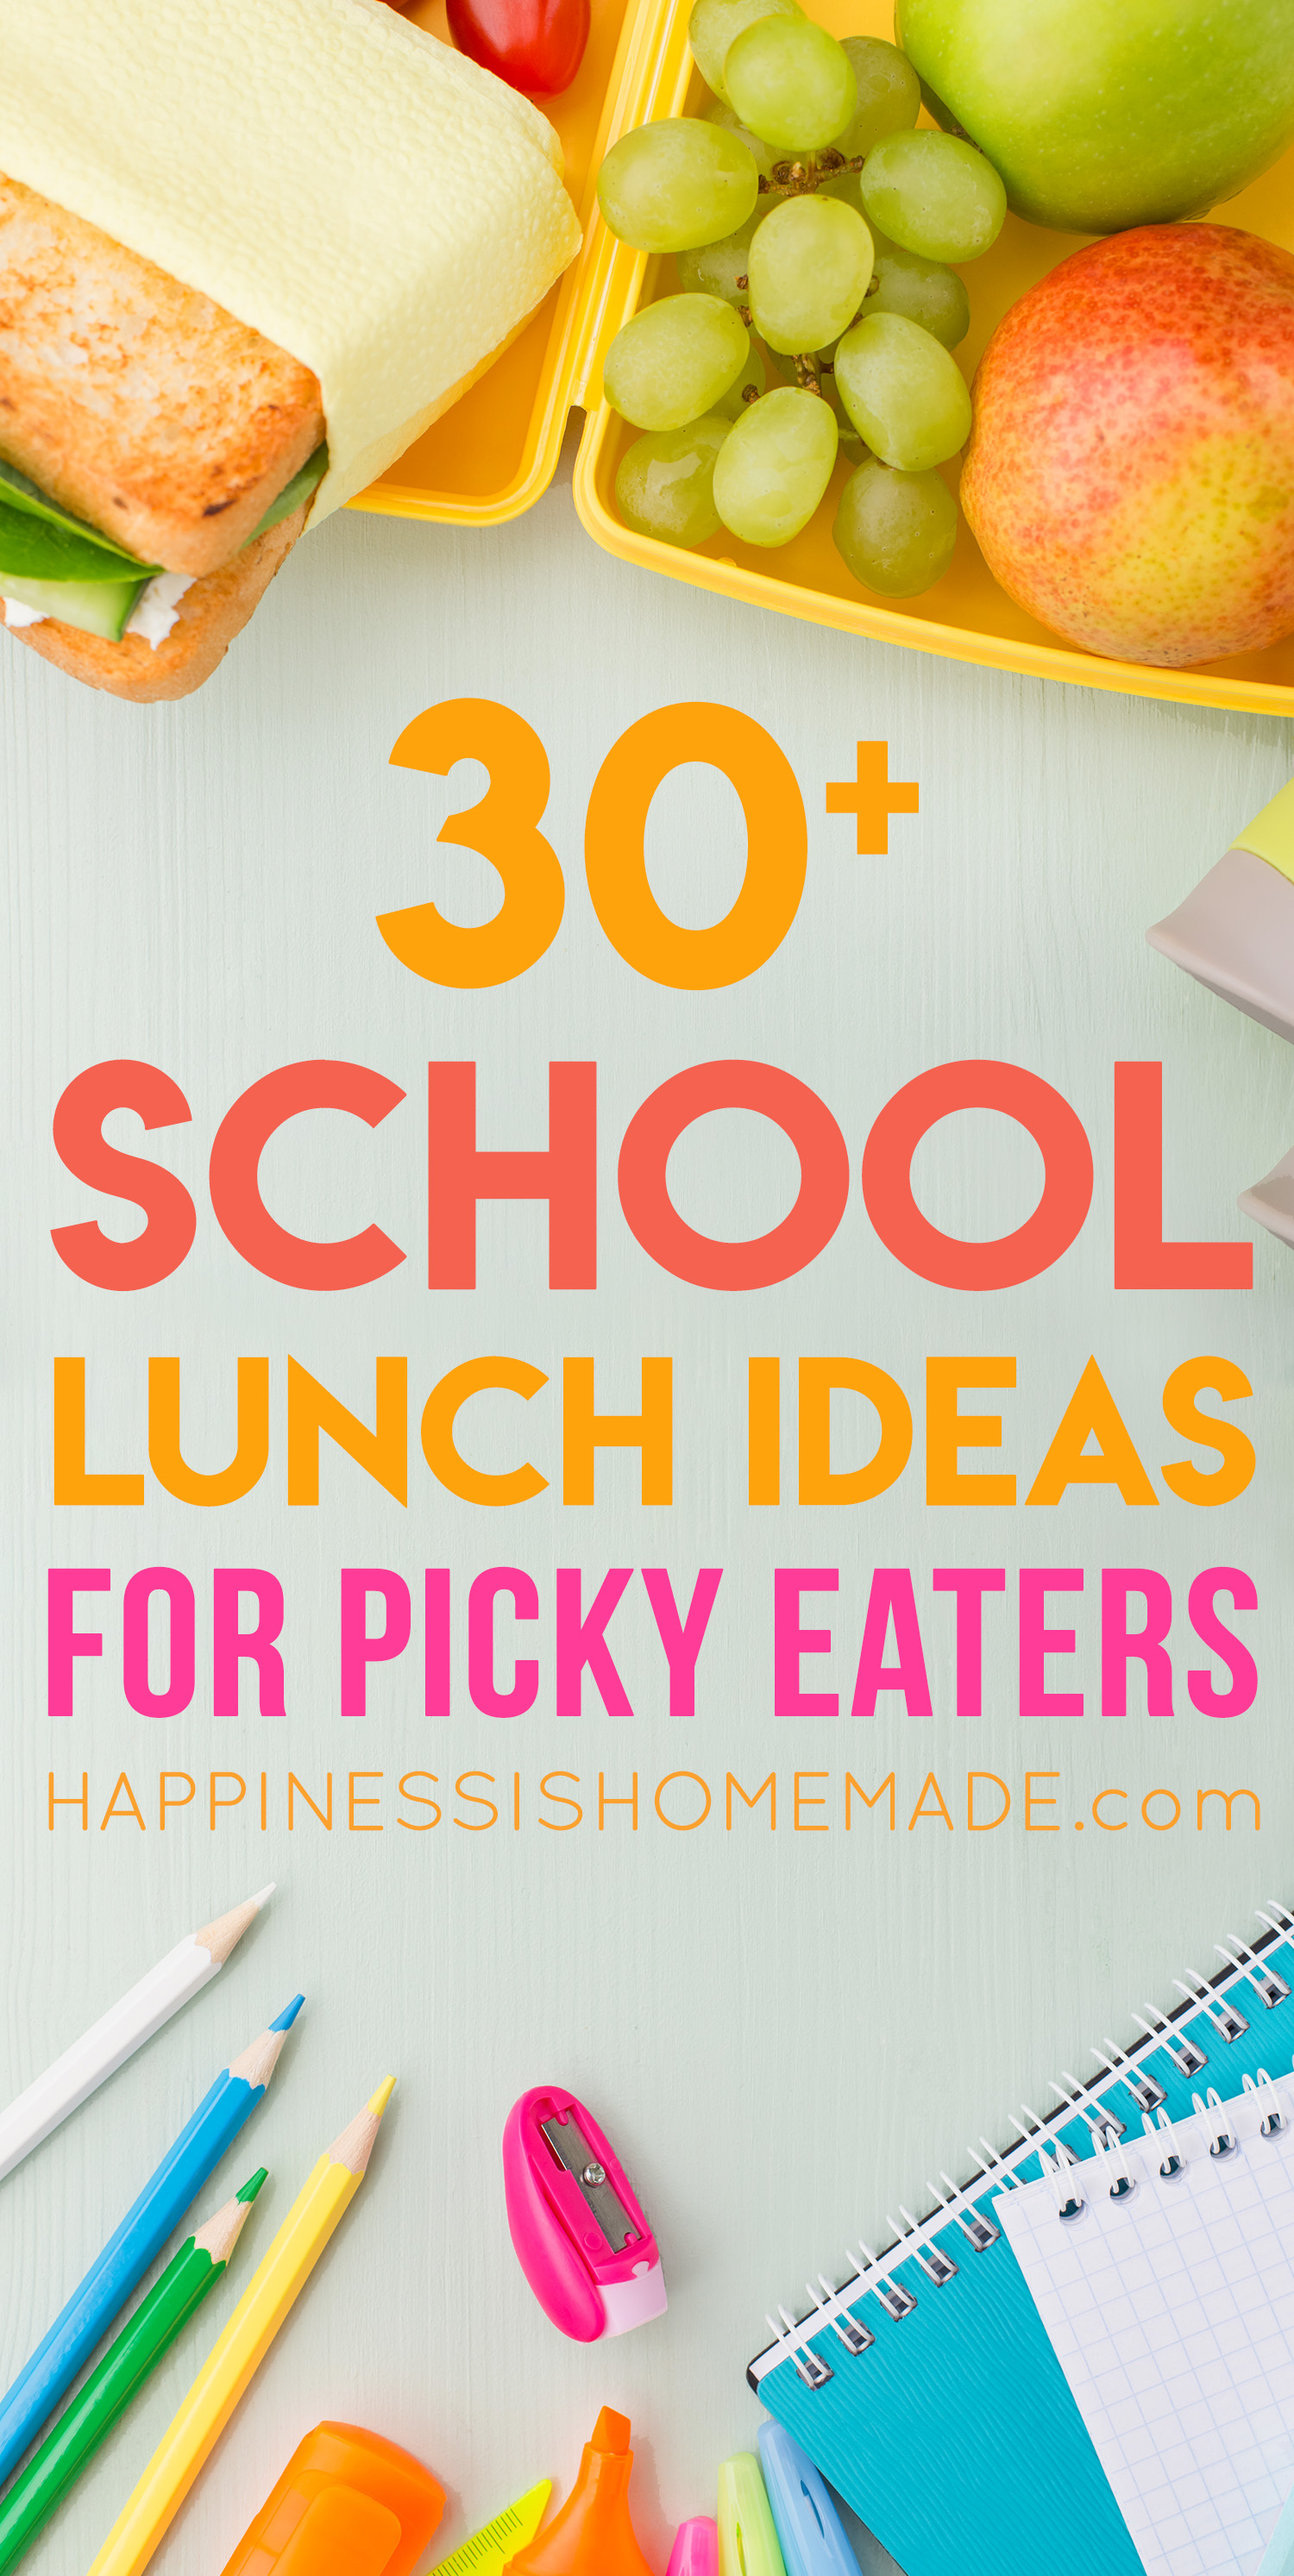 10 Bento-Box Lunches My Picky Kid Loves - The Mom Edit